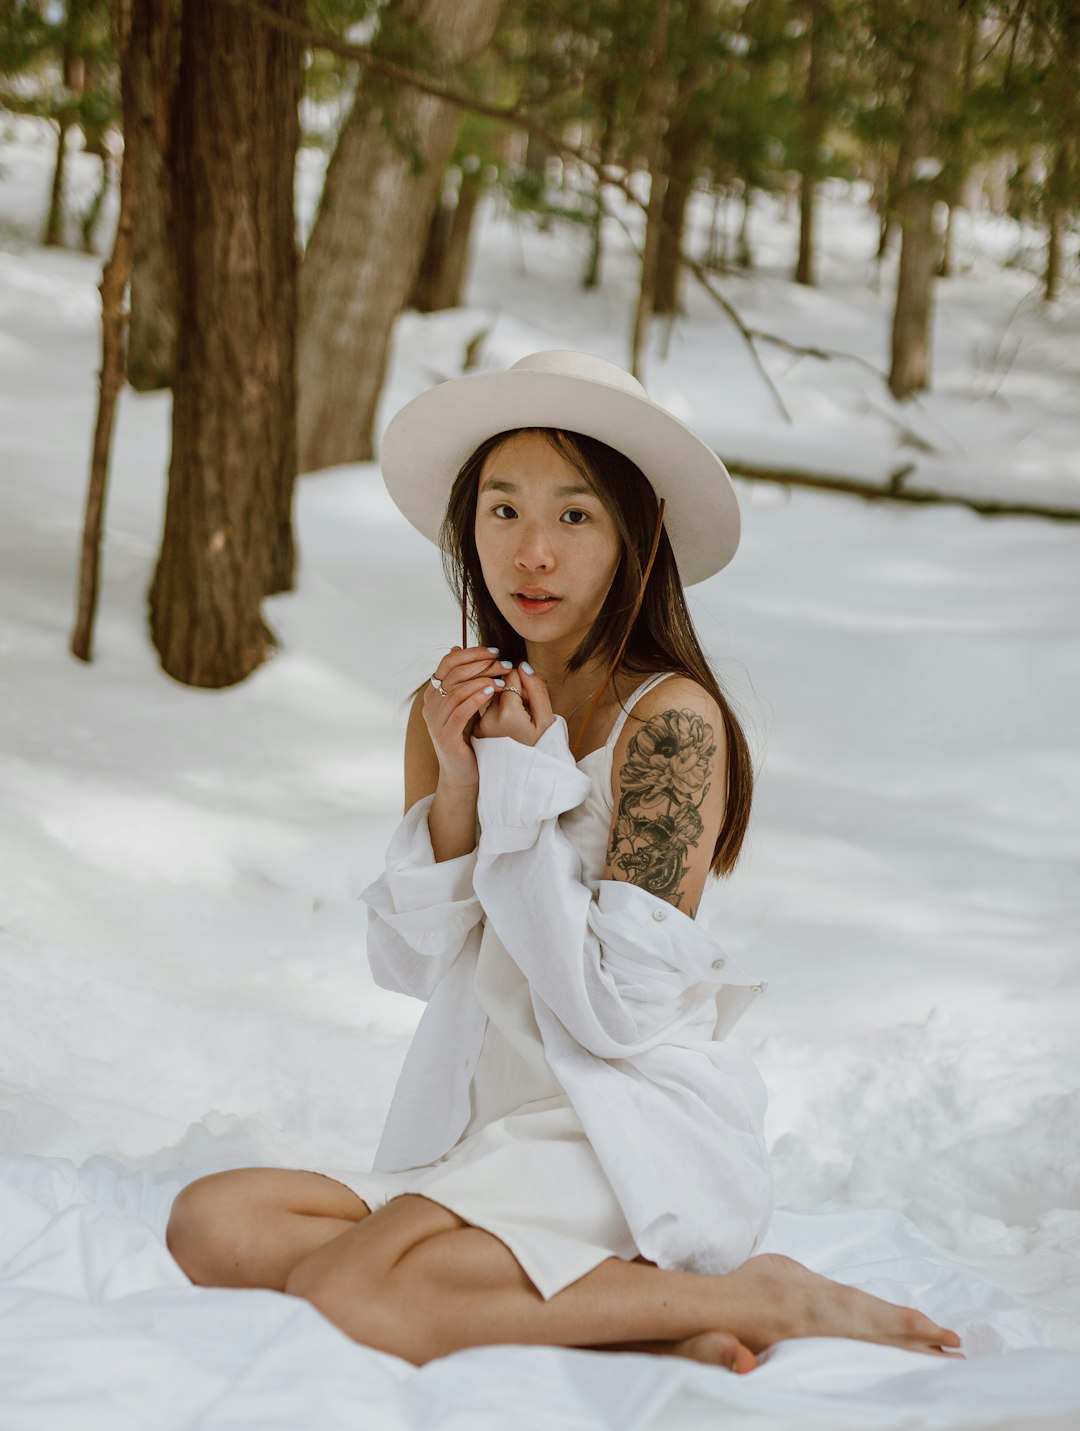 woman in white dress sitting on snow covered ground during daytime